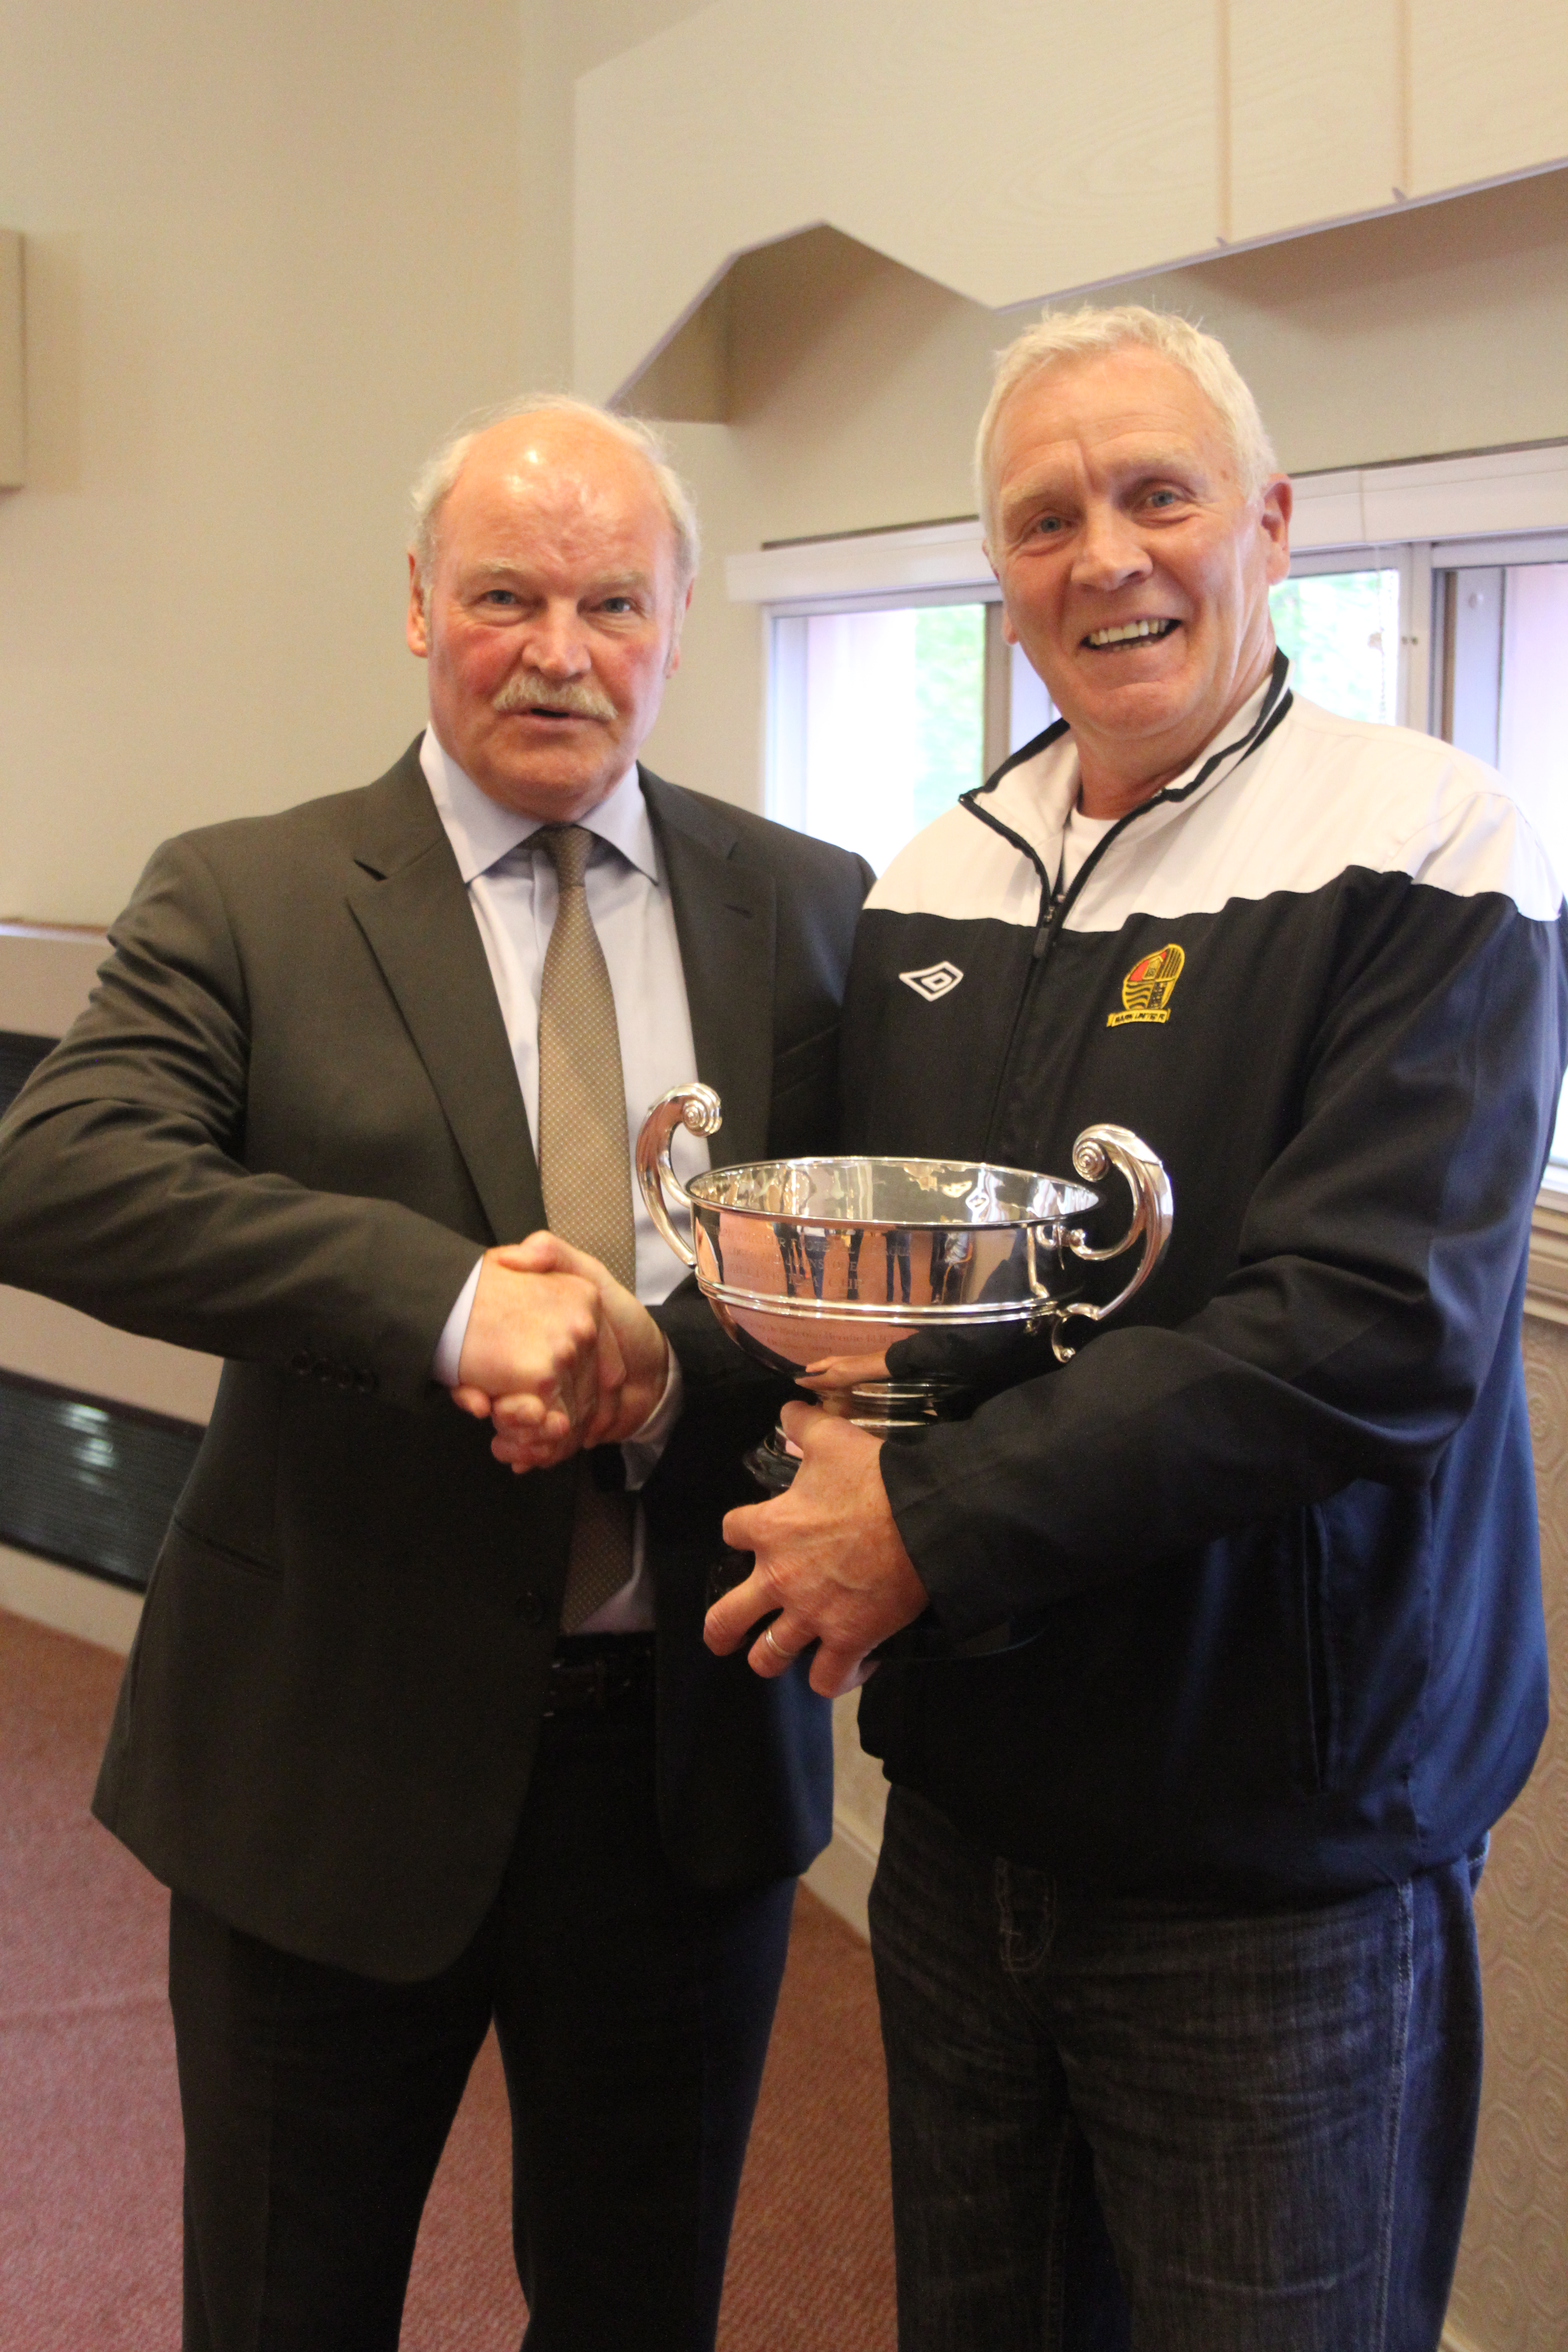 Brian White of Barn Utd being presented with the Logan/Johnstone Cup M Brodie merit award by guest speaker Ronnir McFall